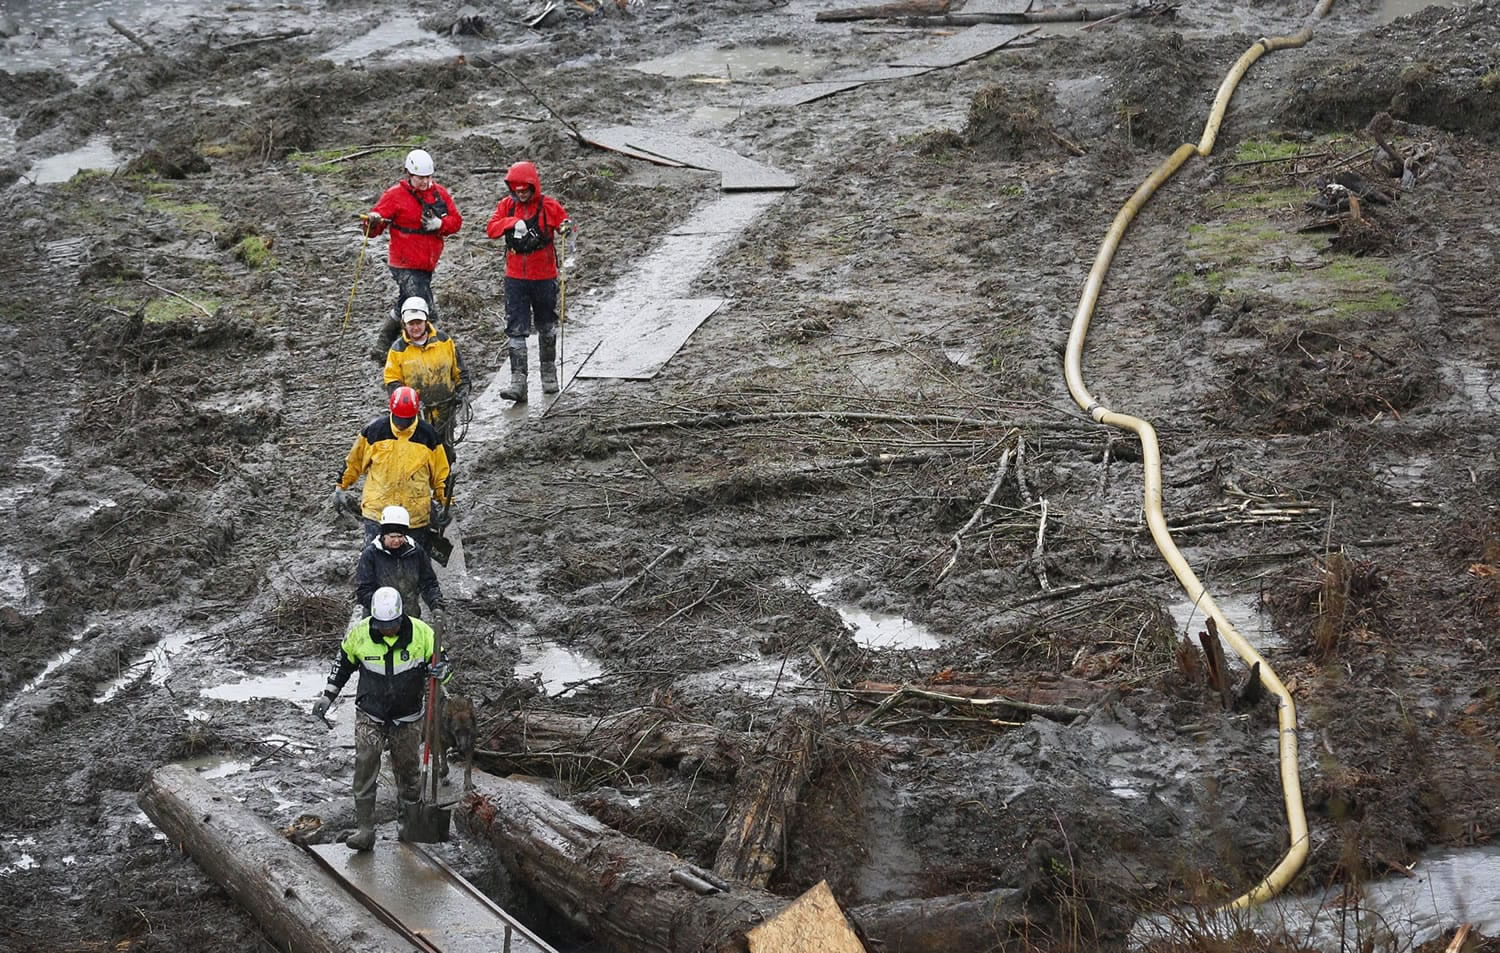 Receding floodwaters at mudslide help with search - The Columbian